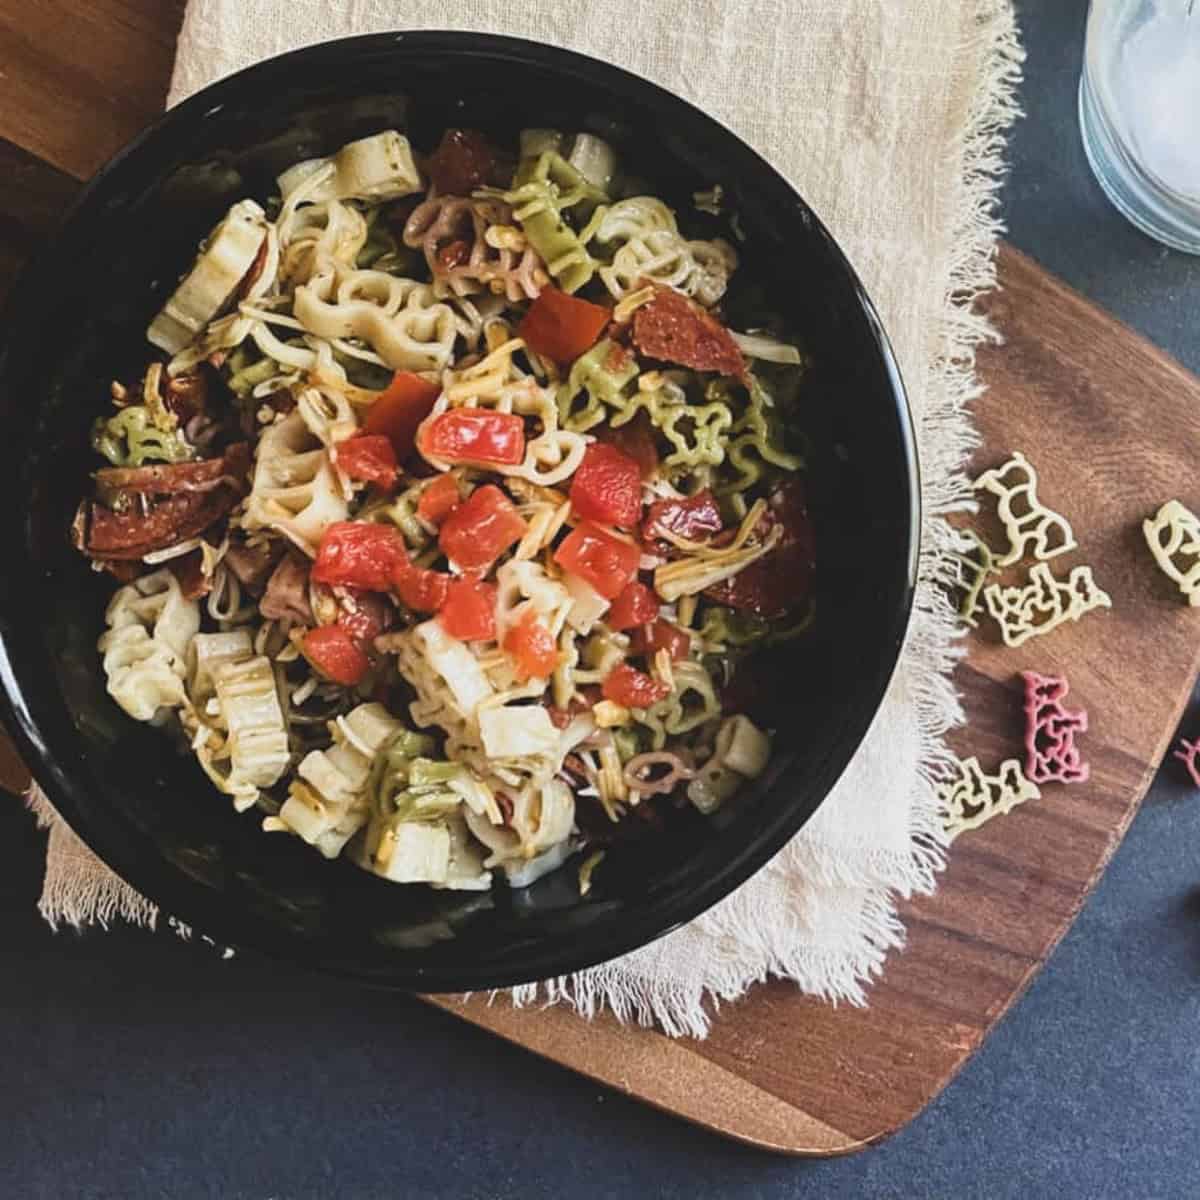 A black bowl filled with colorful alphabet fun pasta shapes on a wooden cutting board